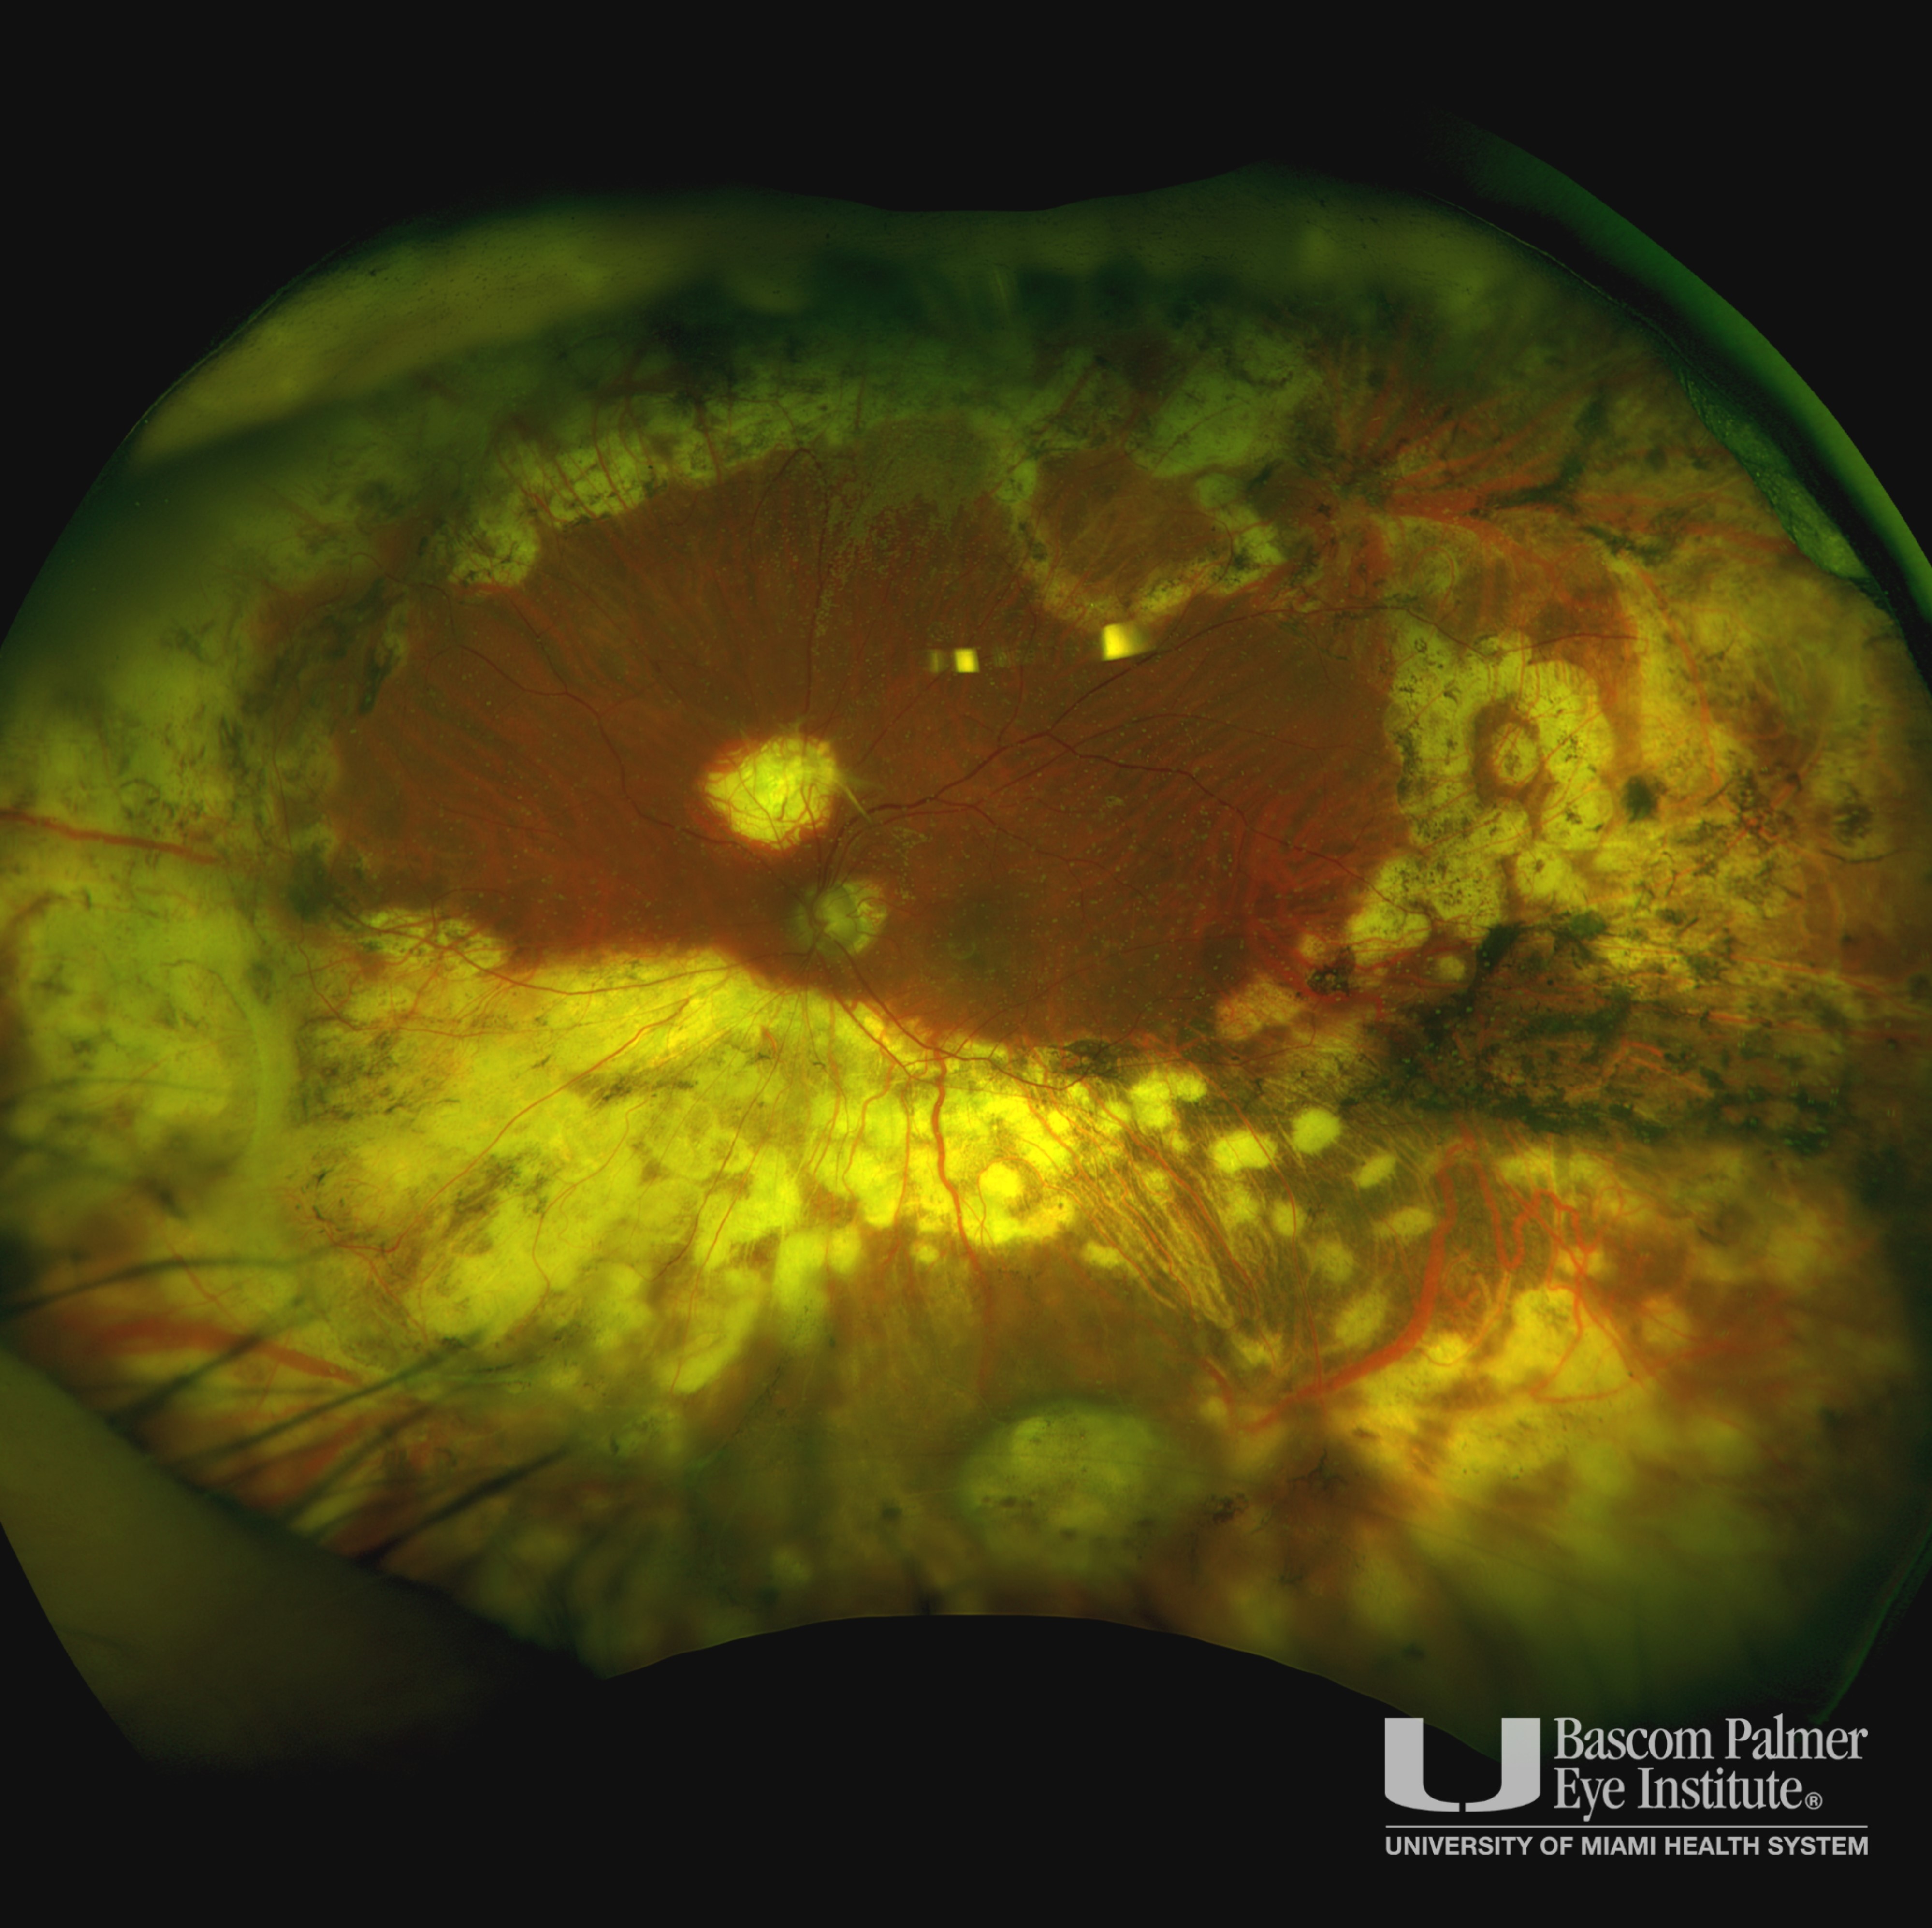 Fundus photography of patient treated with Iodine plaque, PPV and endolaser due to Pseudoangiomatous retinal glisois